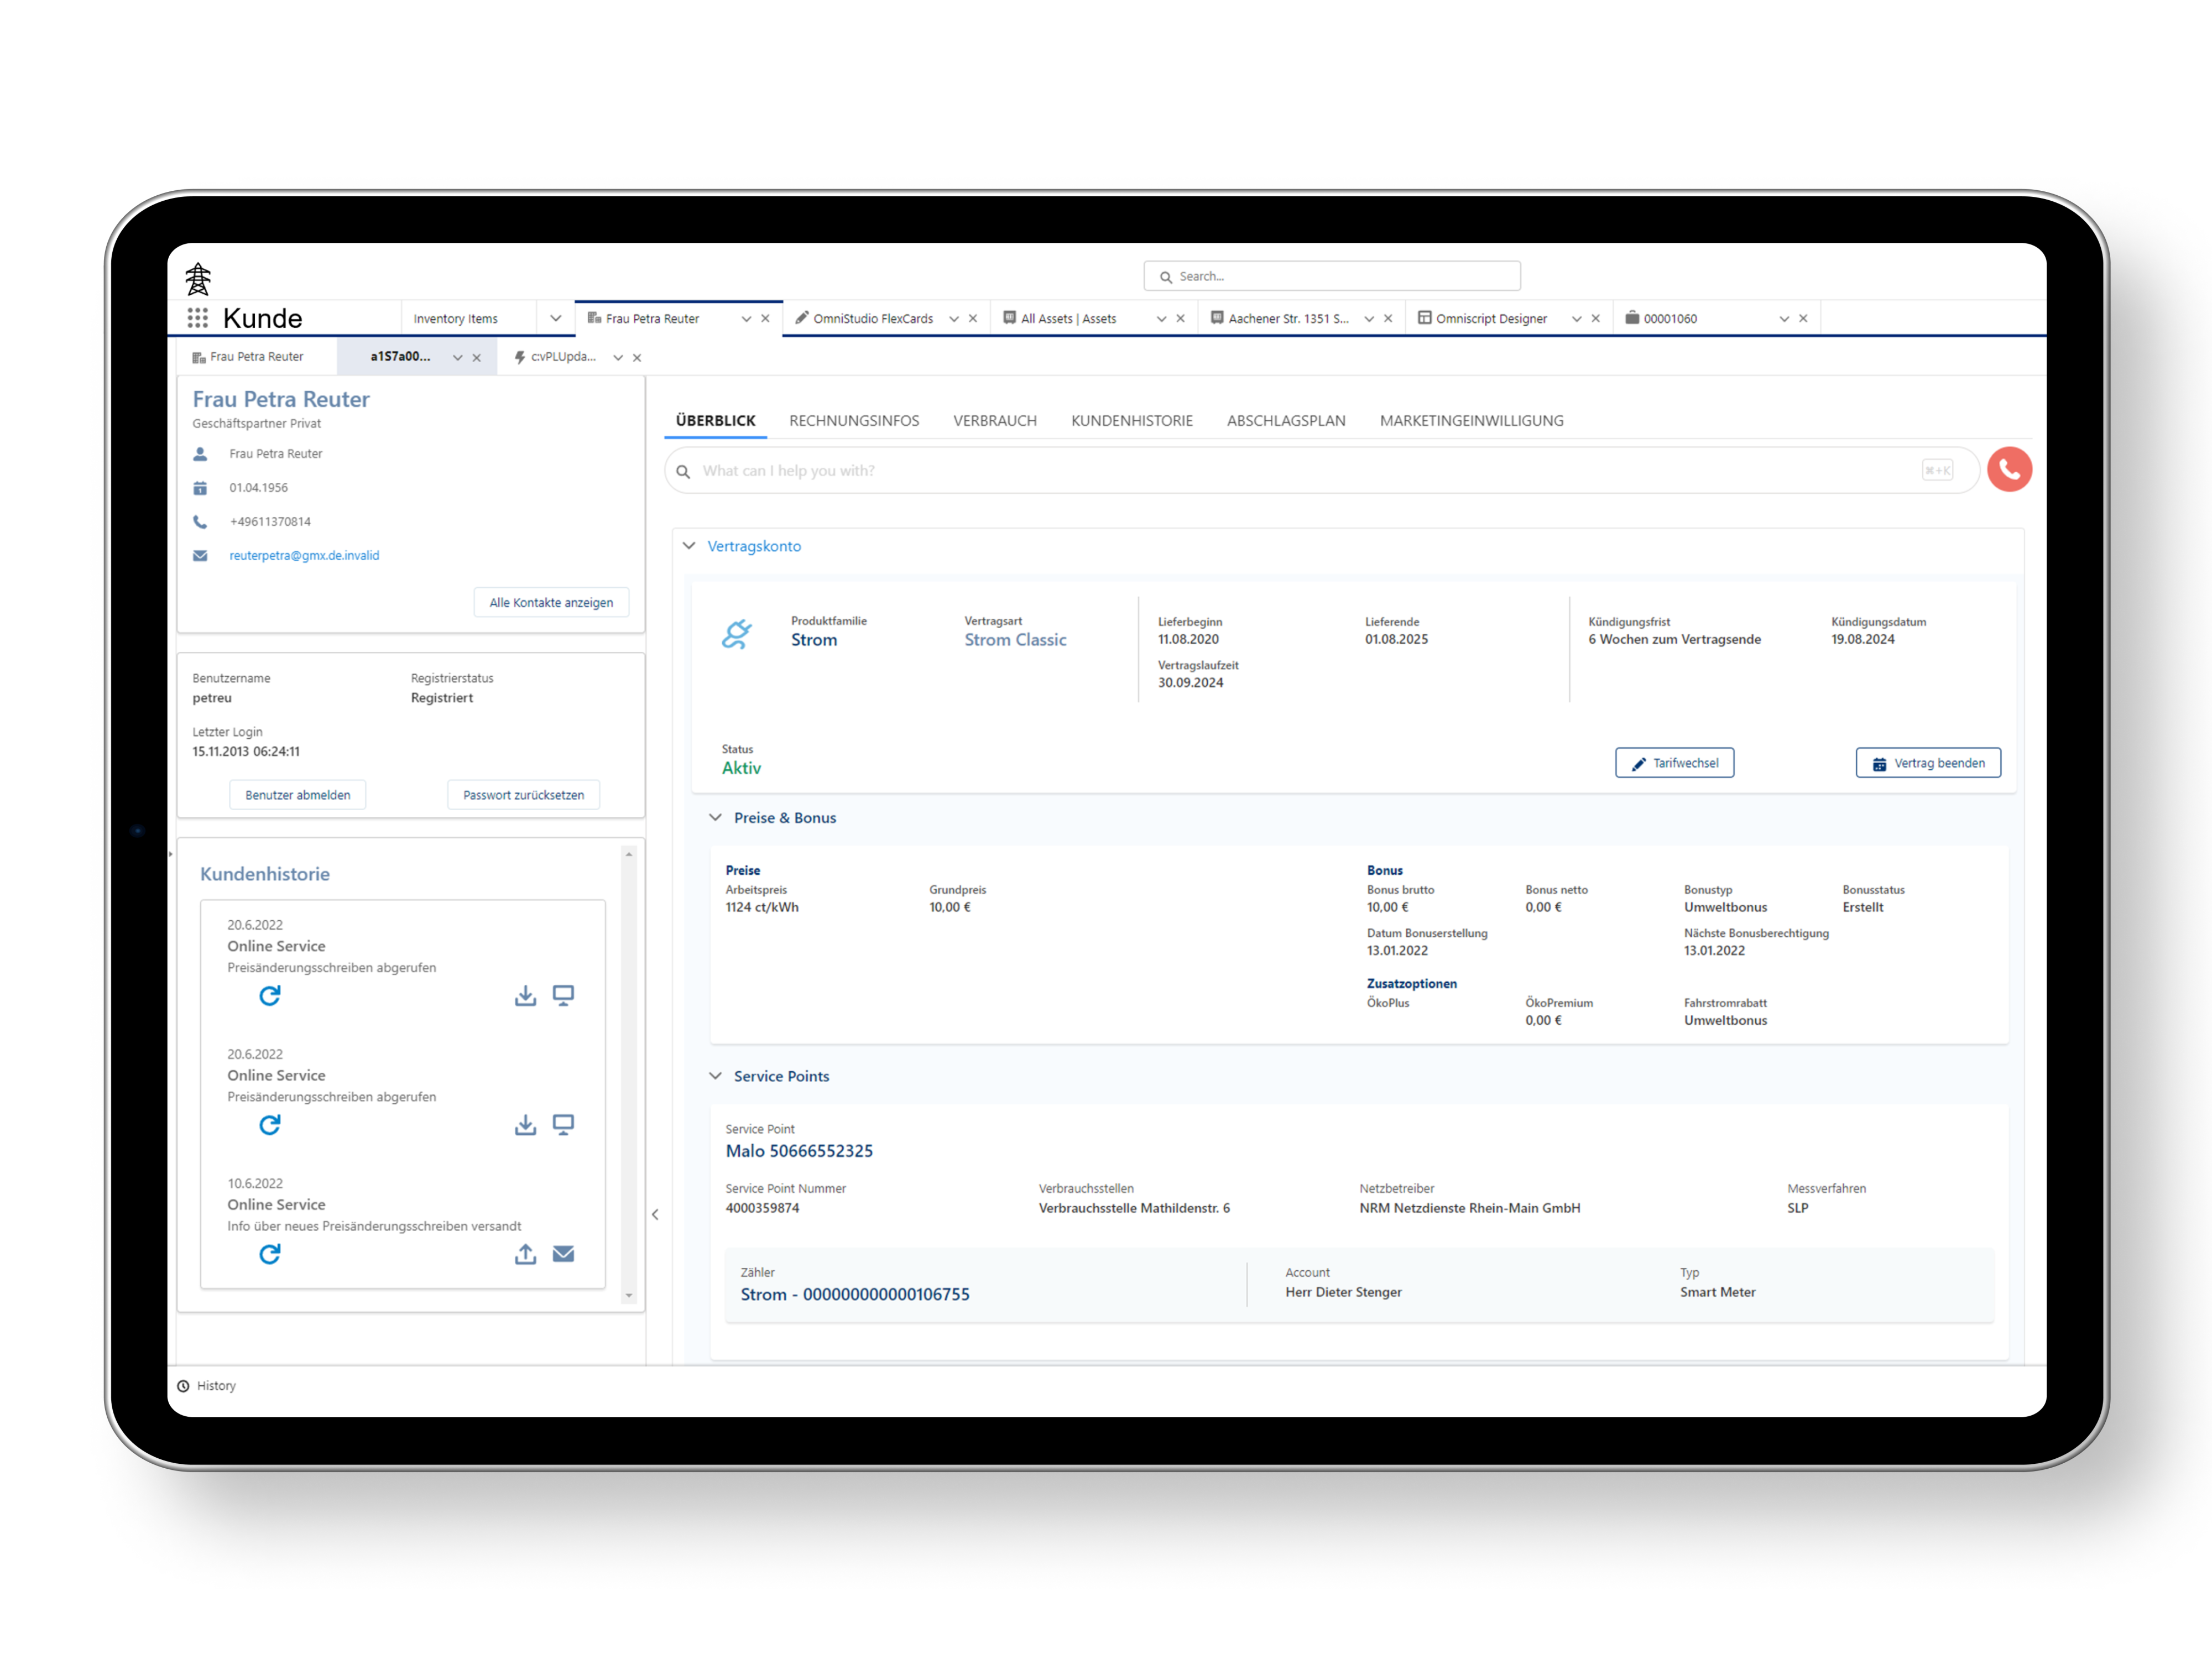 The Salesforce interface shows the page layout of an end customer. All information like name, contact details & address are displayed. More information can be viewed via tabs Customer History, Billing Information & Consumption.